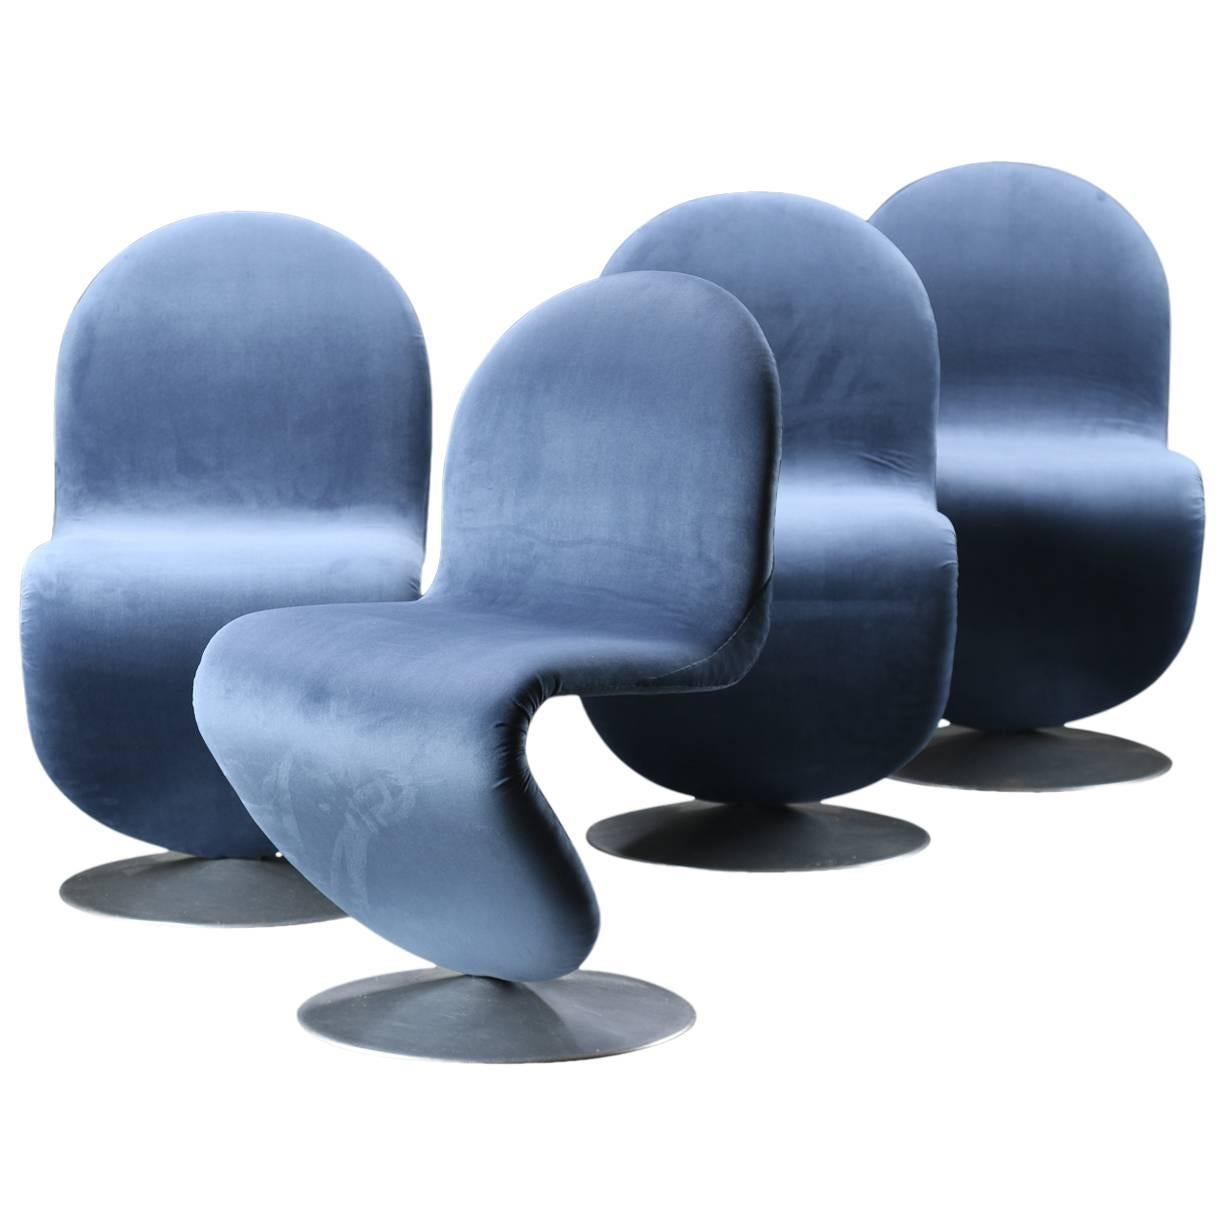 Set of Four Verner Panton Chairs by Fritz Hansen, circa 1970 For Sale